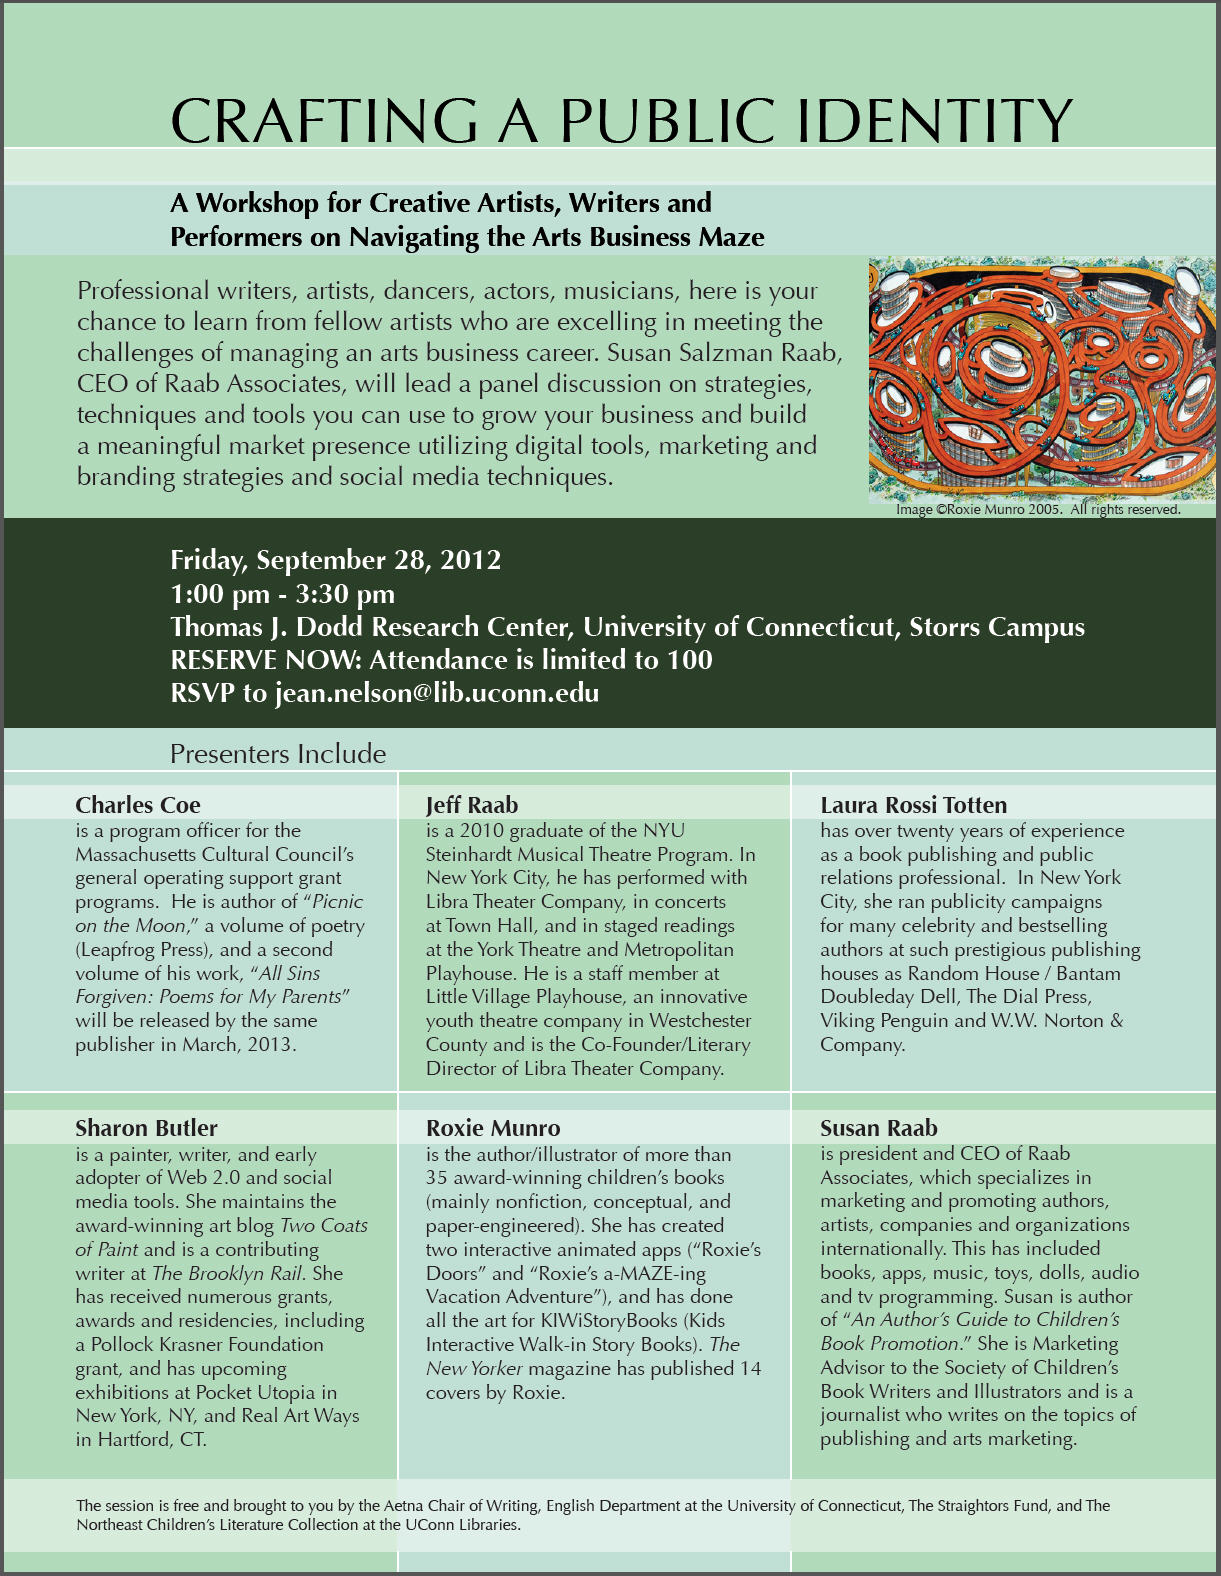 "Crafting a Public Identity" Workshop 9/28/2012 Dodd Research Center, Storrs, CT